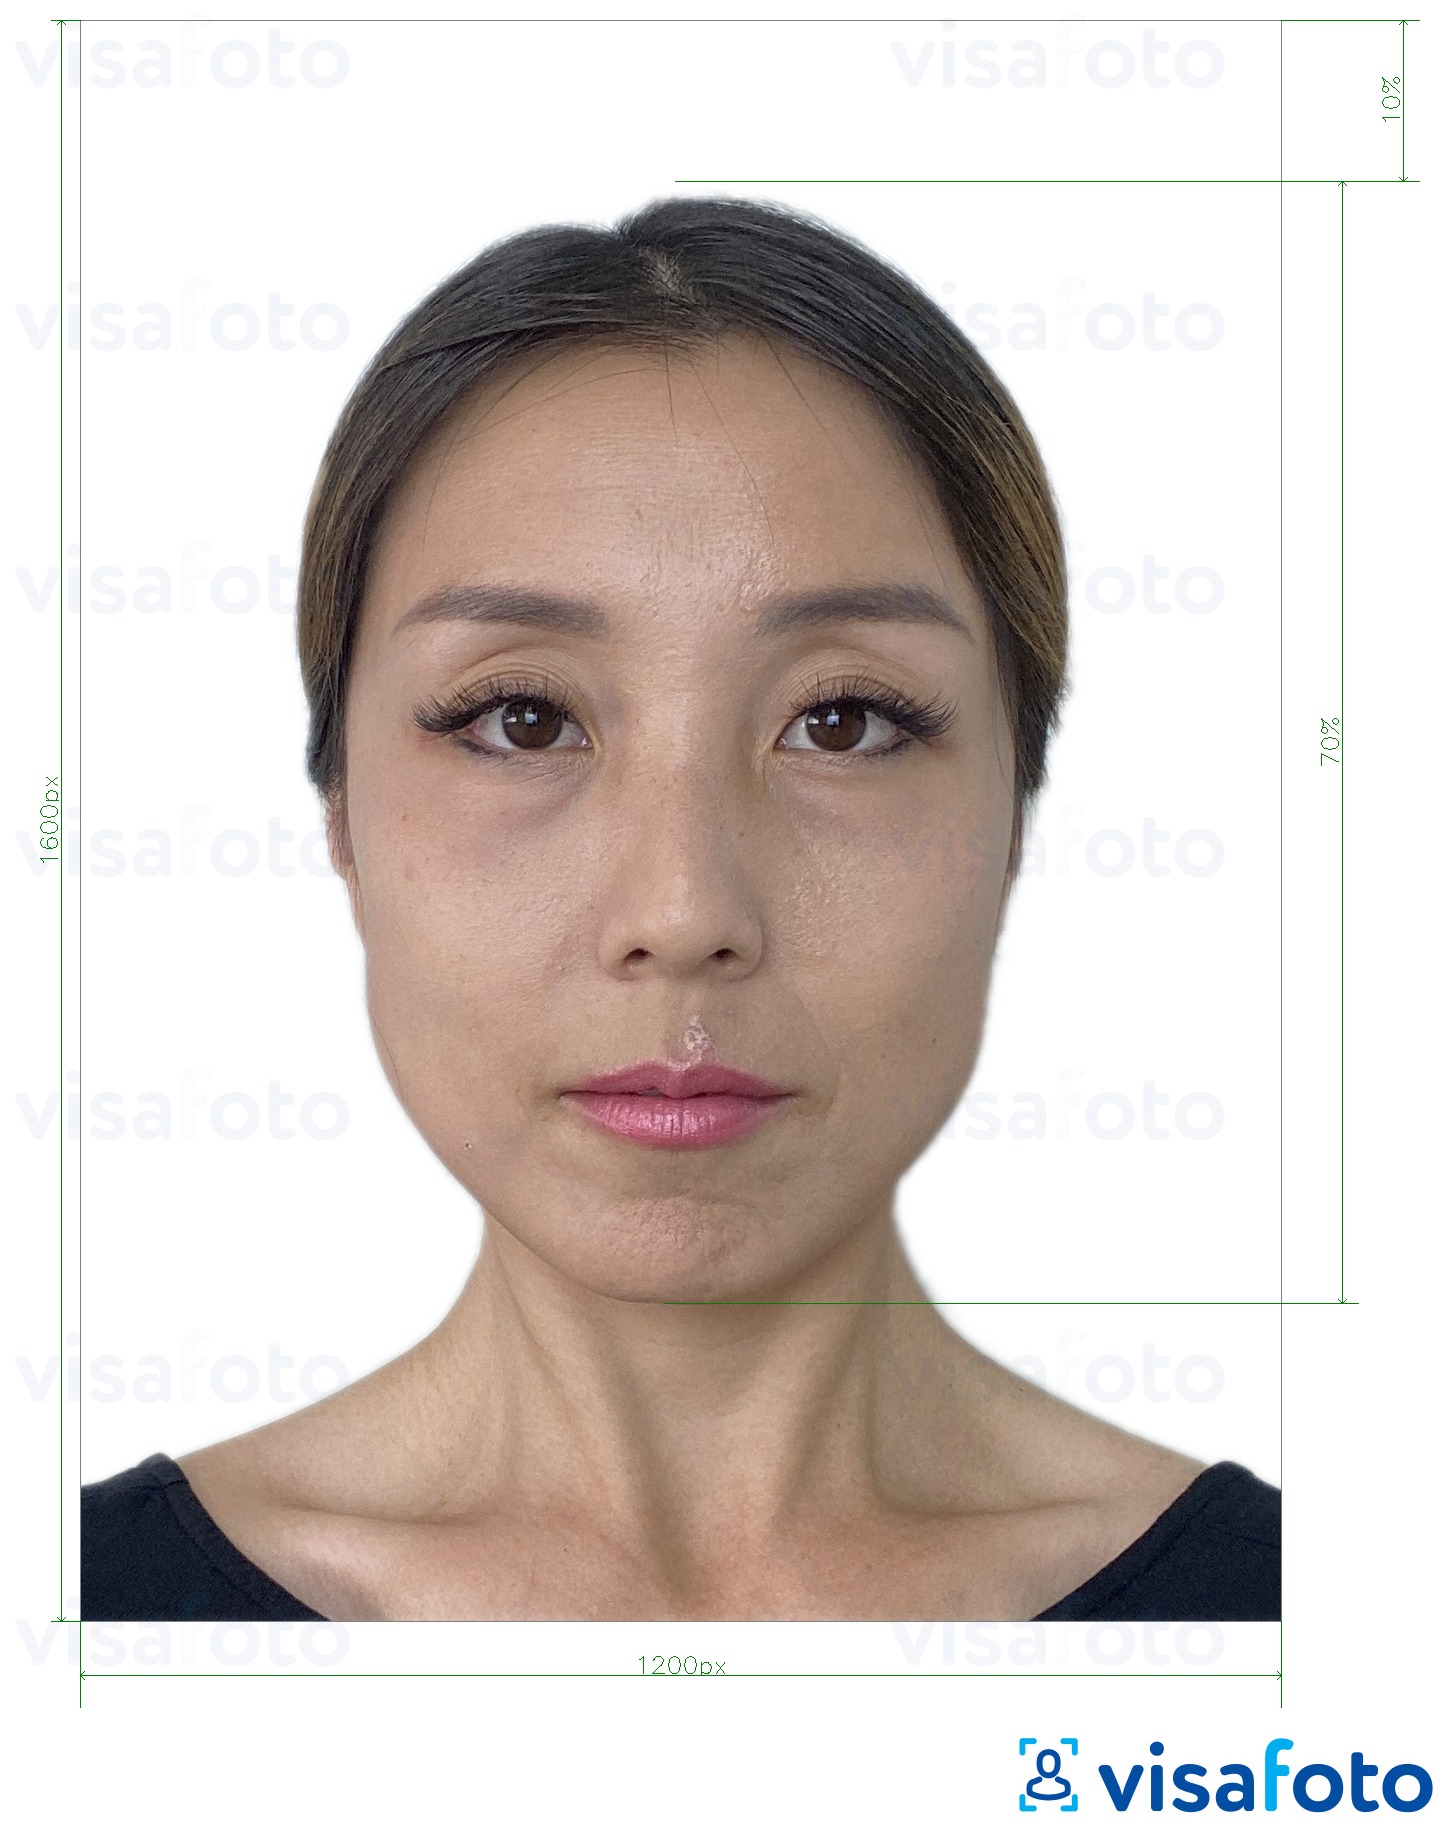 Example of photo for Hong Kong online e-visa 1200x1600 pixels with exact size specification